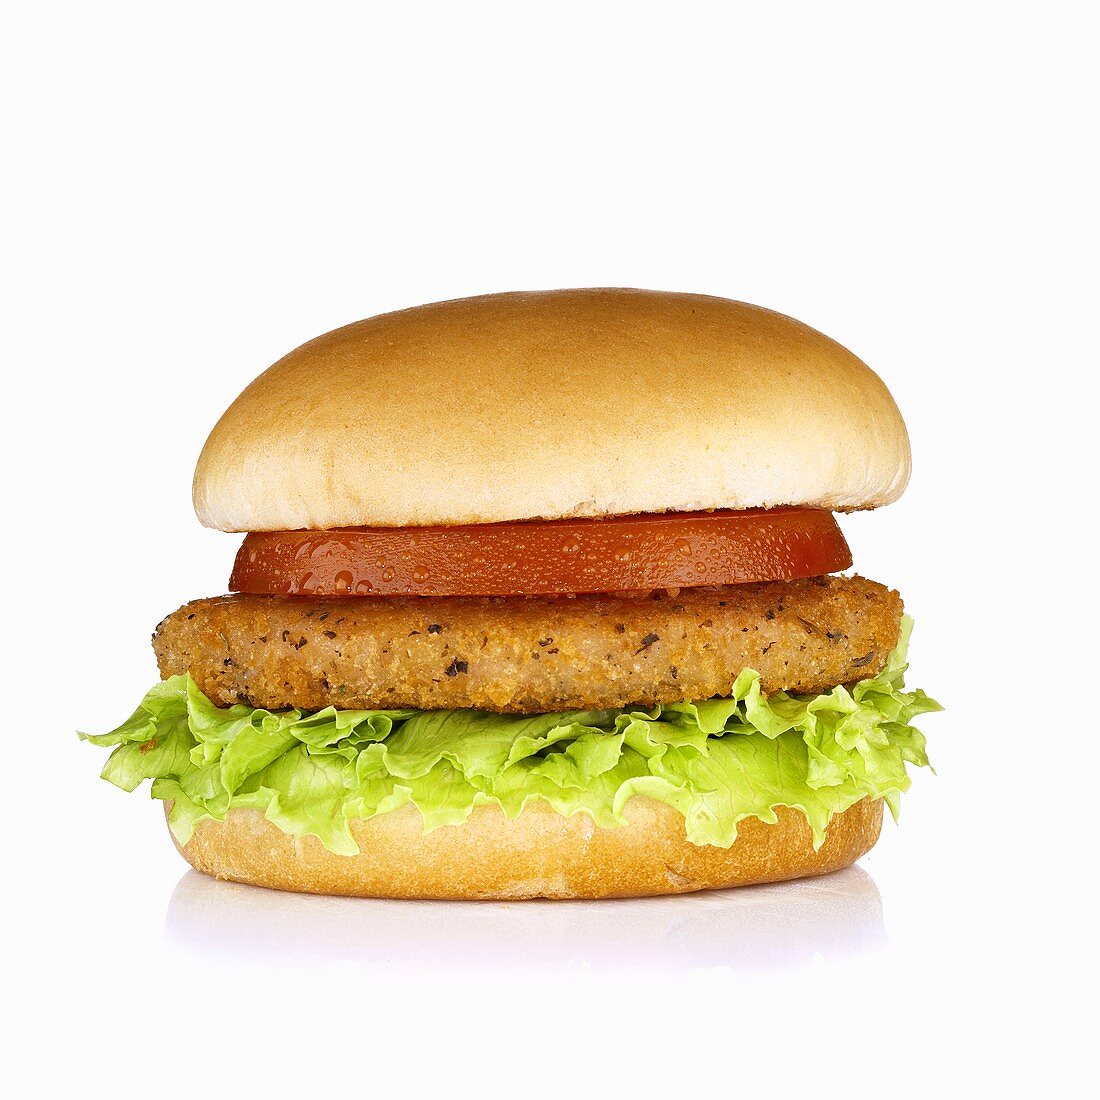 Breaded Tuna Burger with Lettuce and Tomato on a White Background